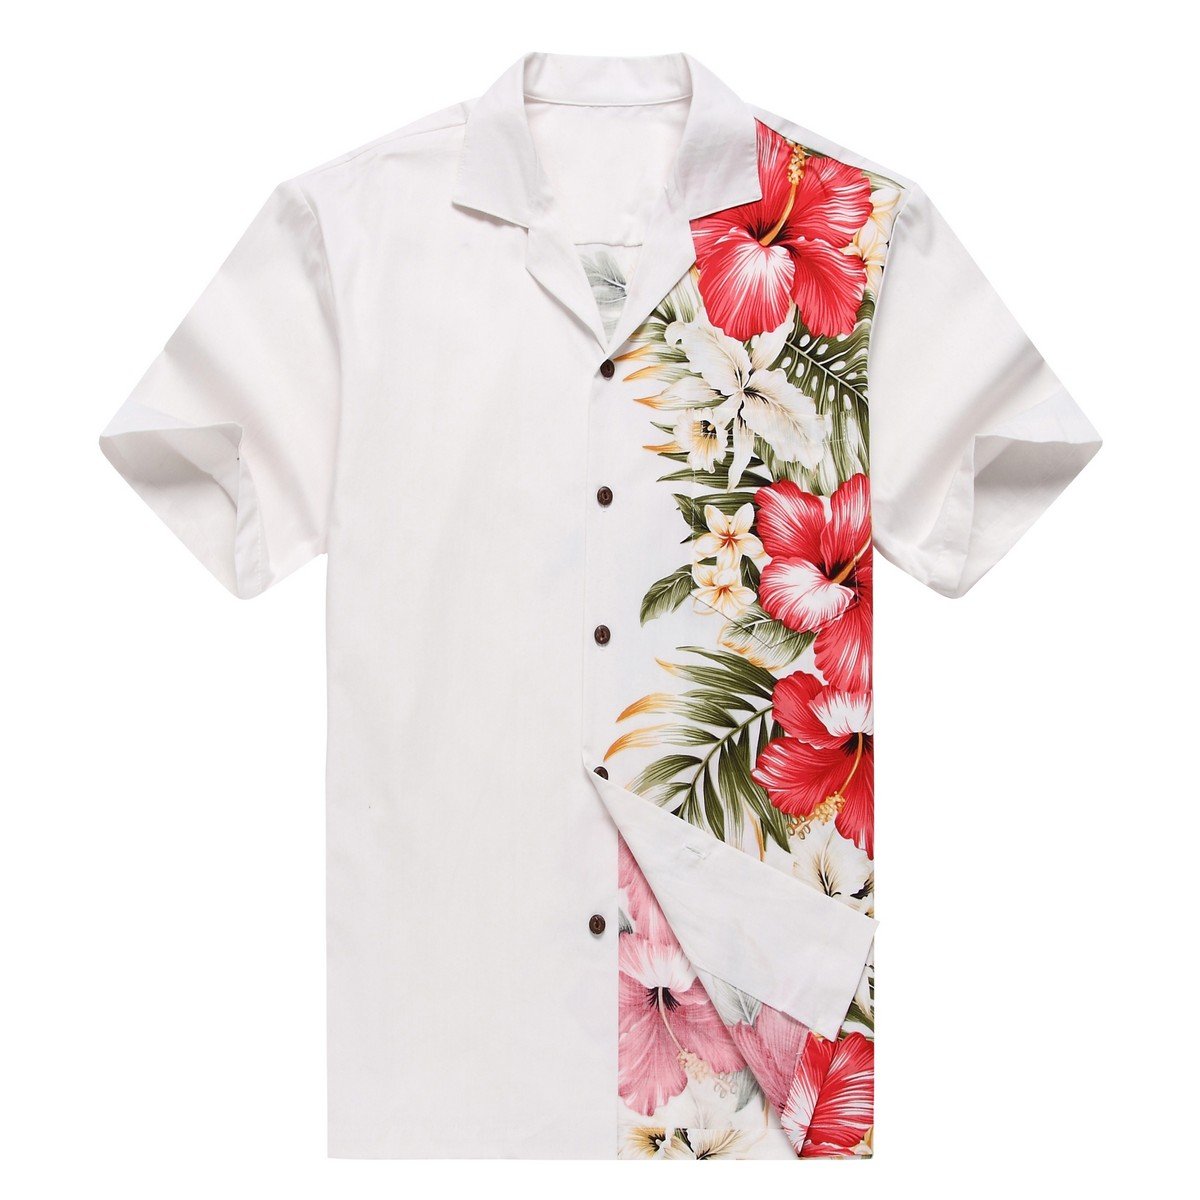 Men's Aloha Shirt Side Floral Hibiscus White - Pinotee Store